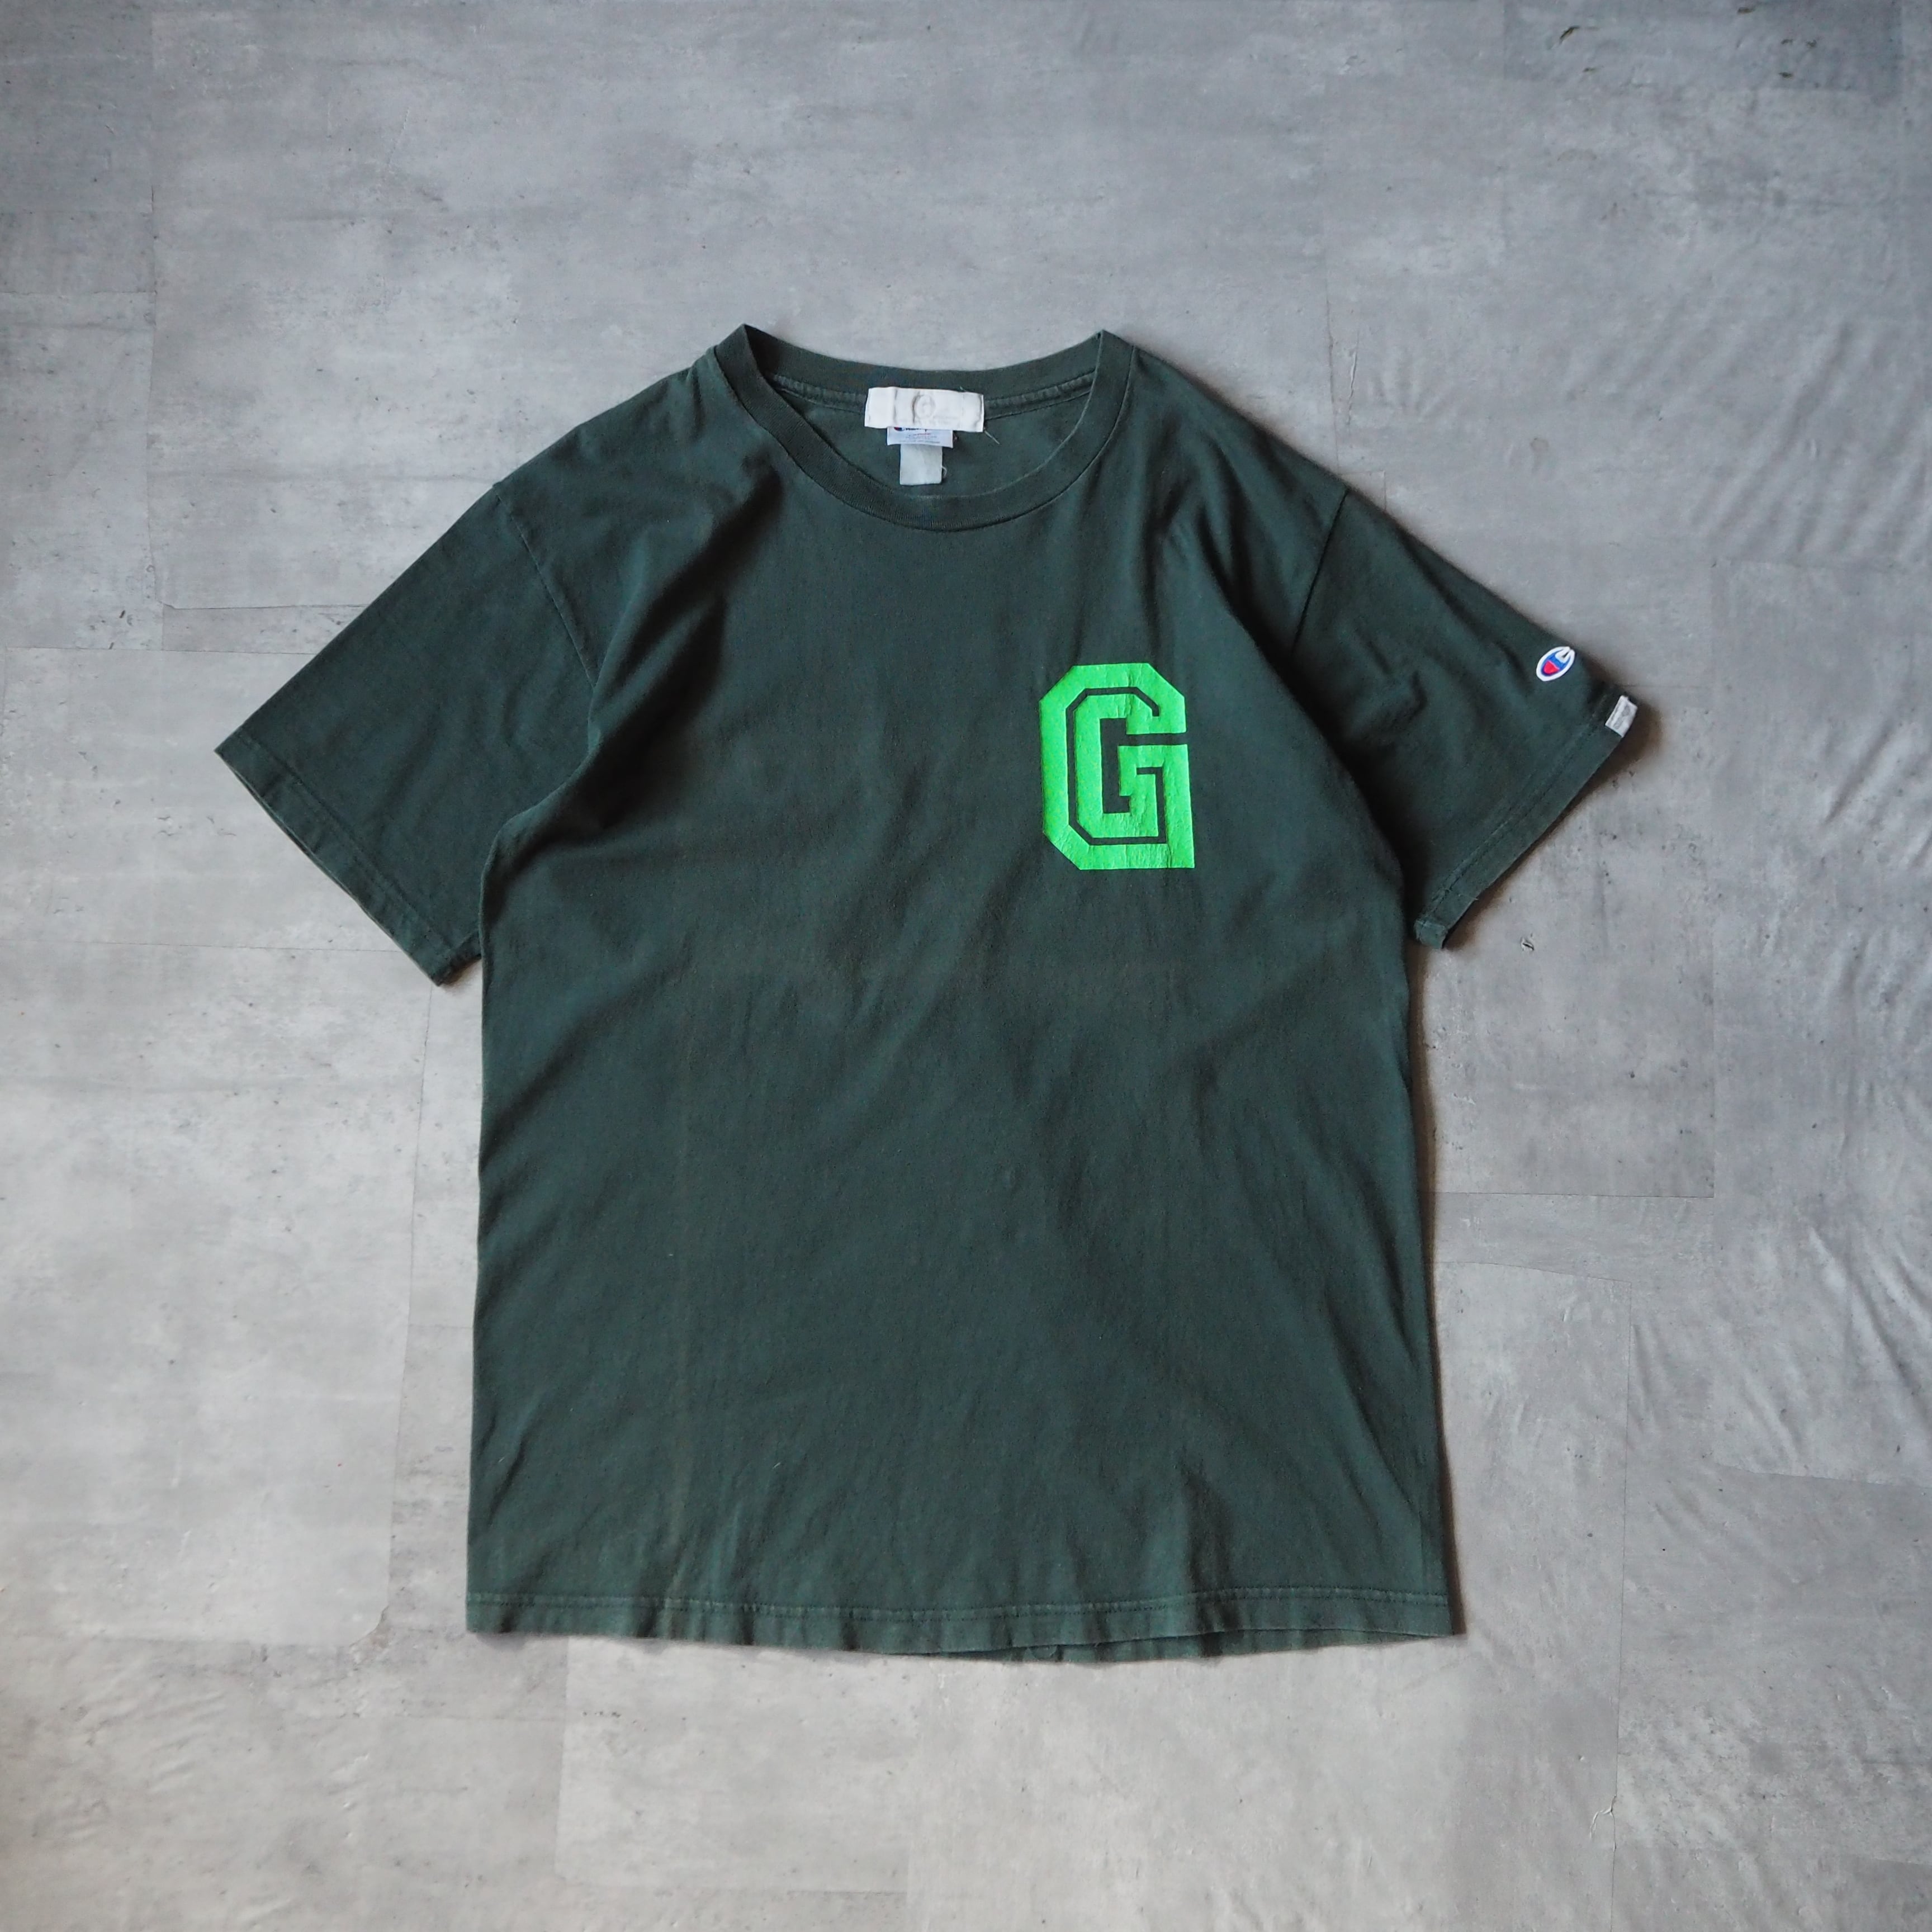 Late 90s “good enough” champion body logo T-shirt made in USA 90